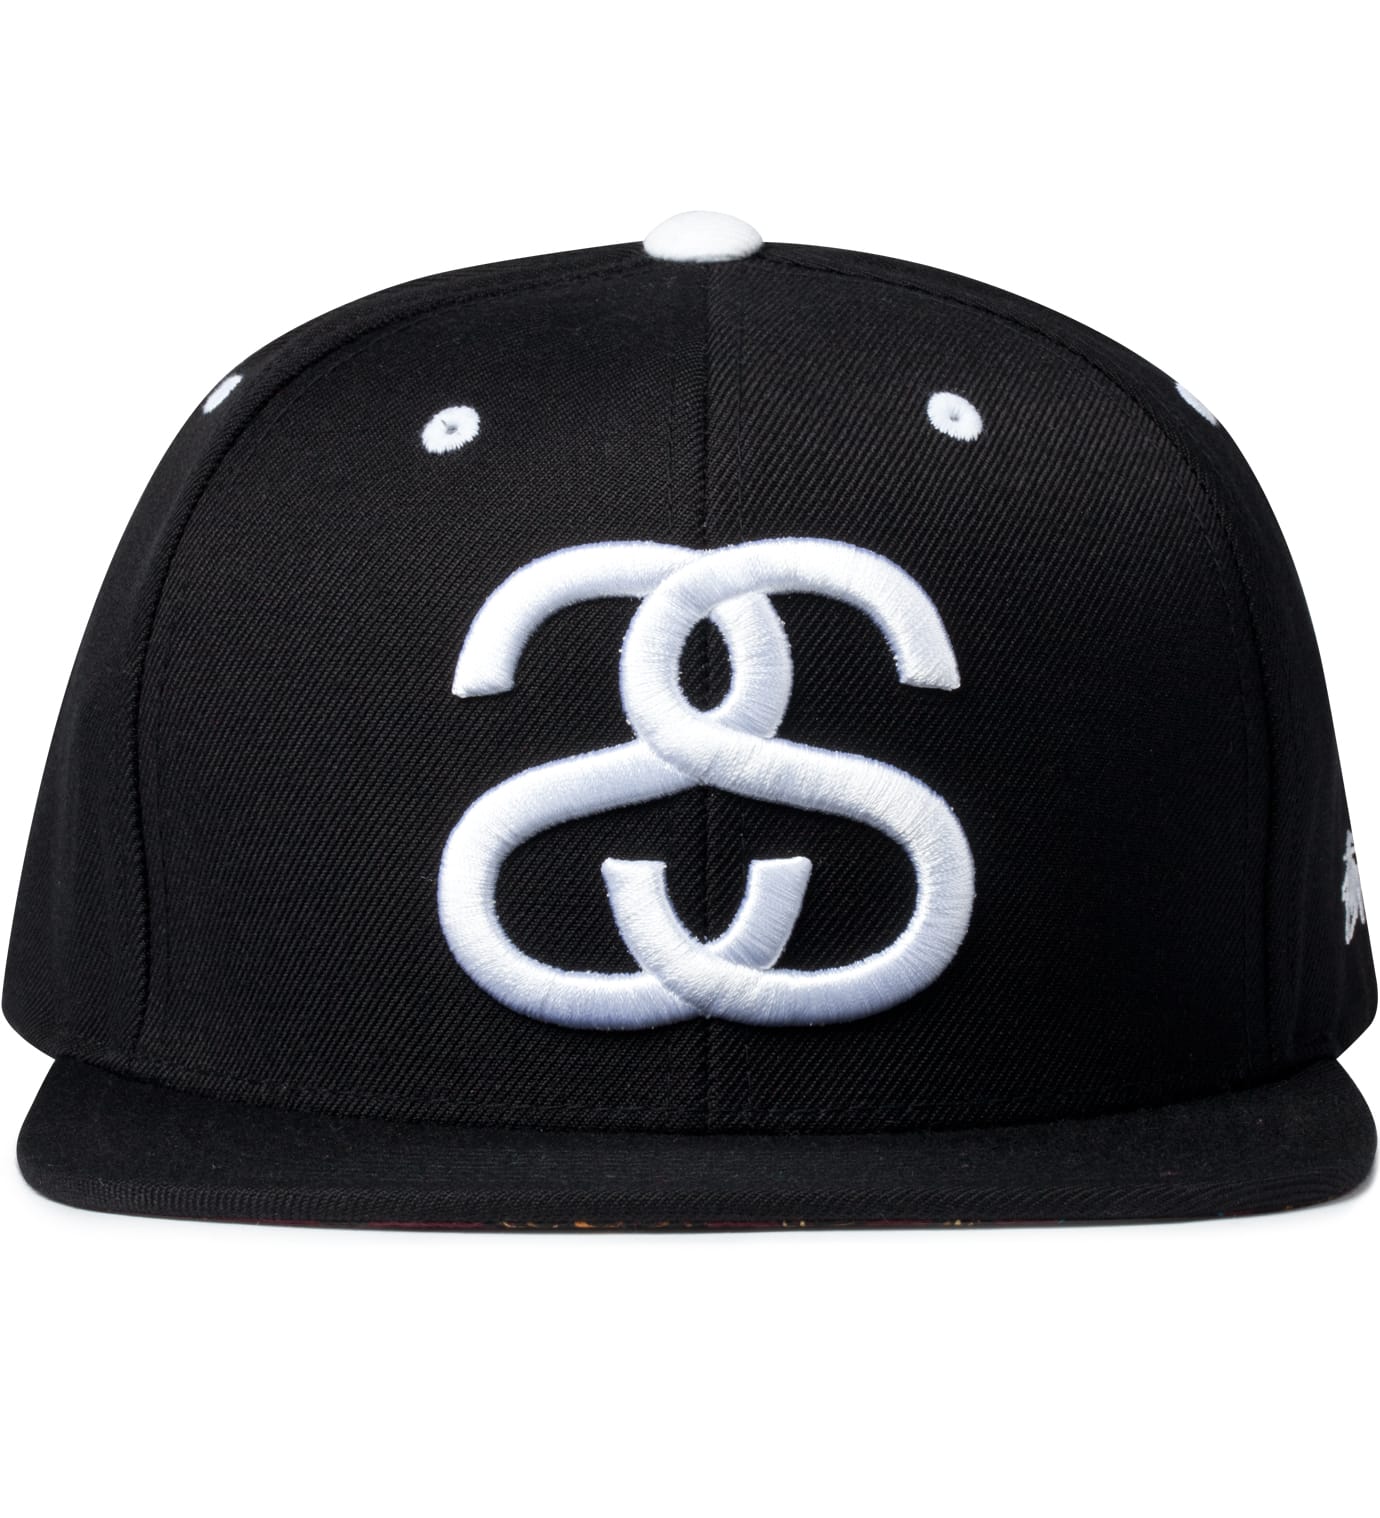 Stüssy   Black Double S Cap   HBX   Globally Curated Fashion and